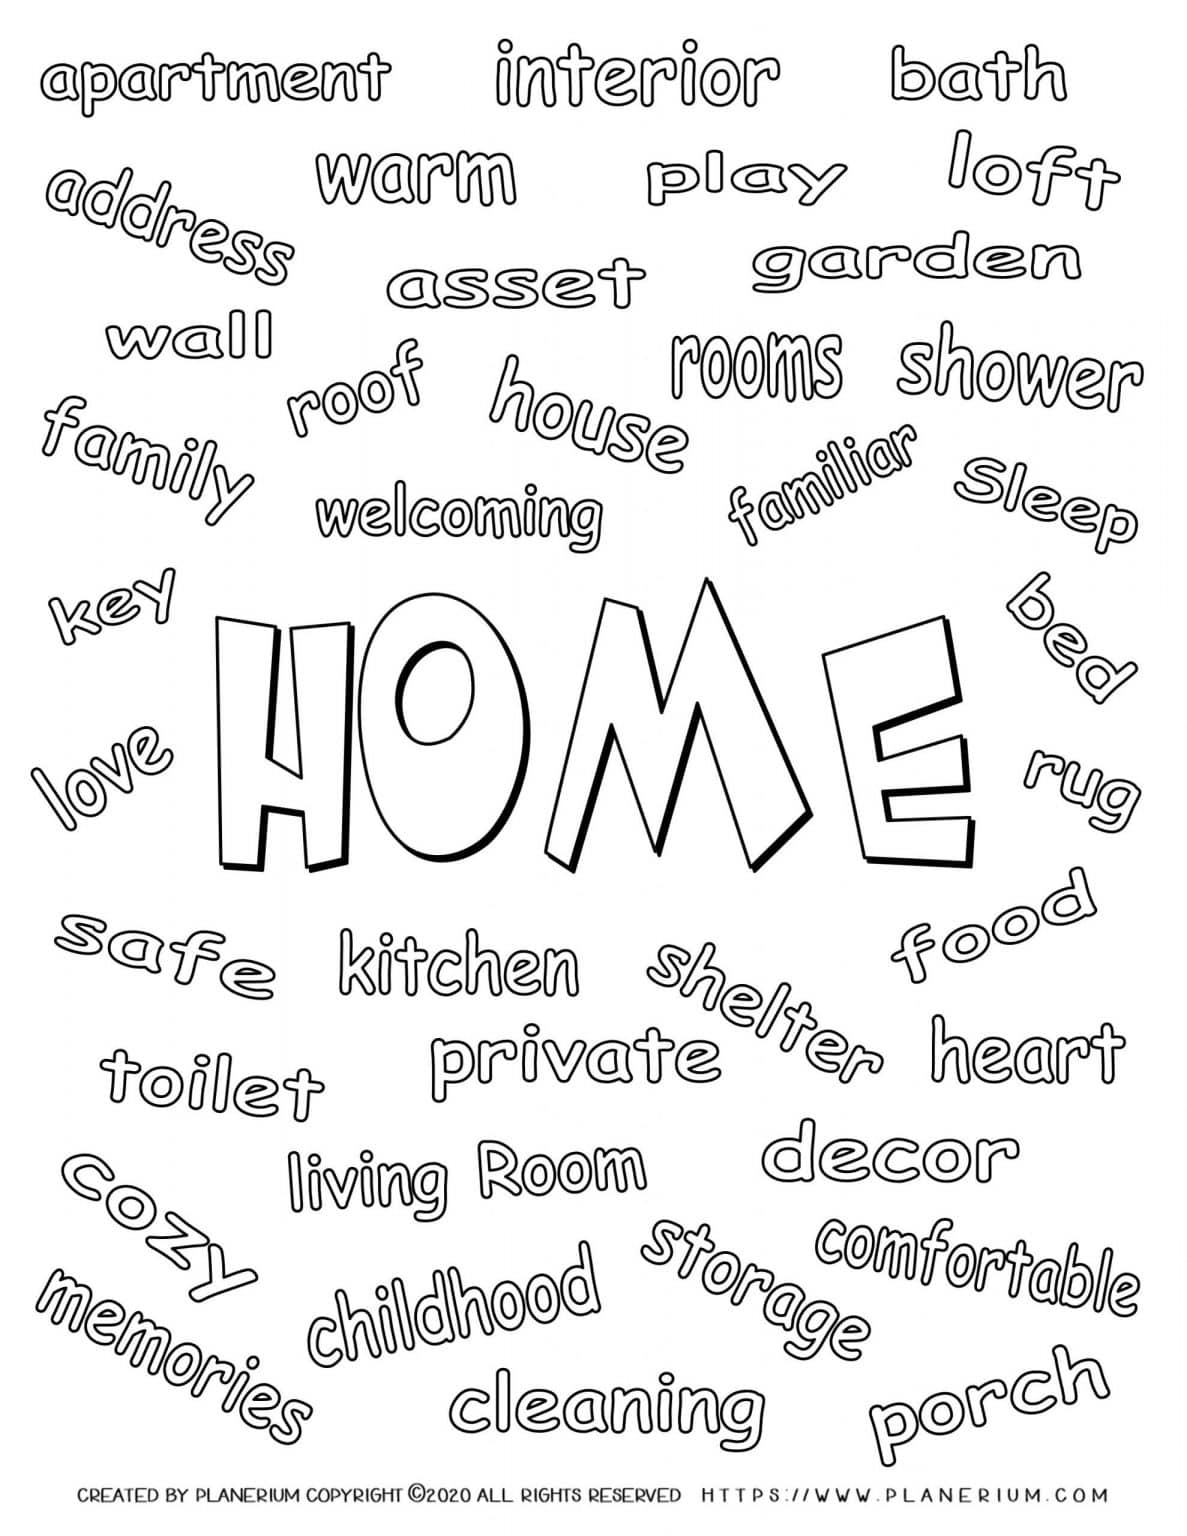 My Home - Coloring Page - Related Words